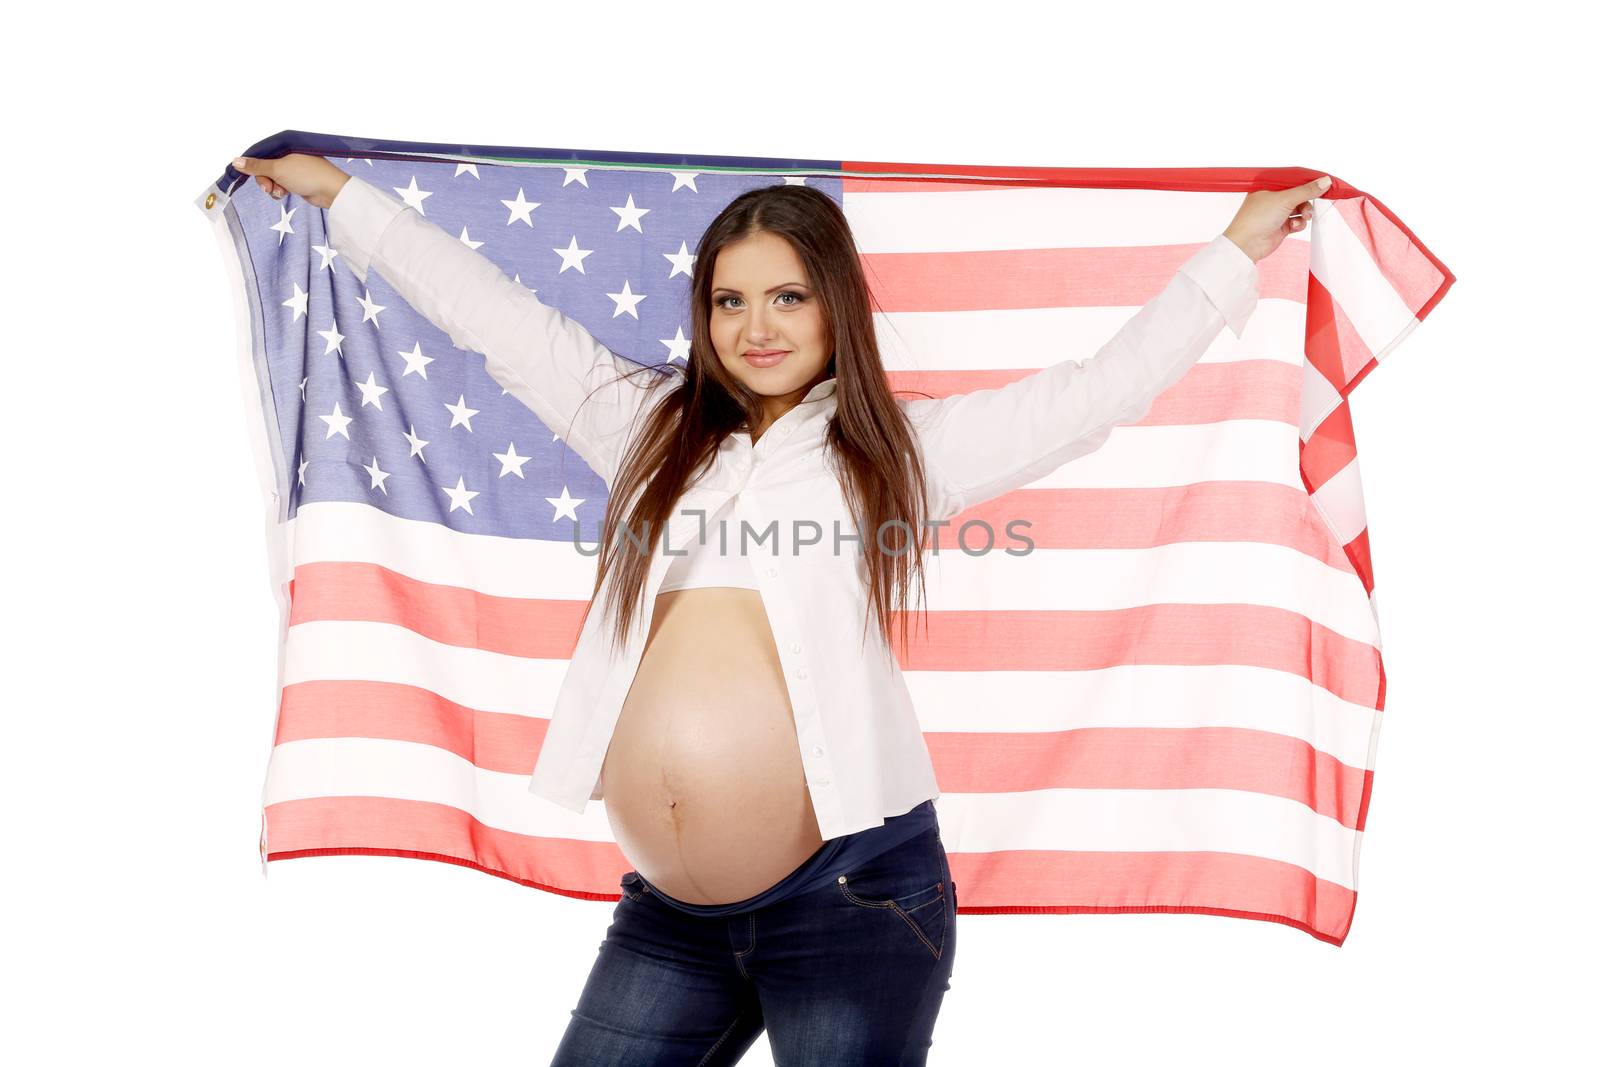 Pregnant woman with american flag hanging from her hands